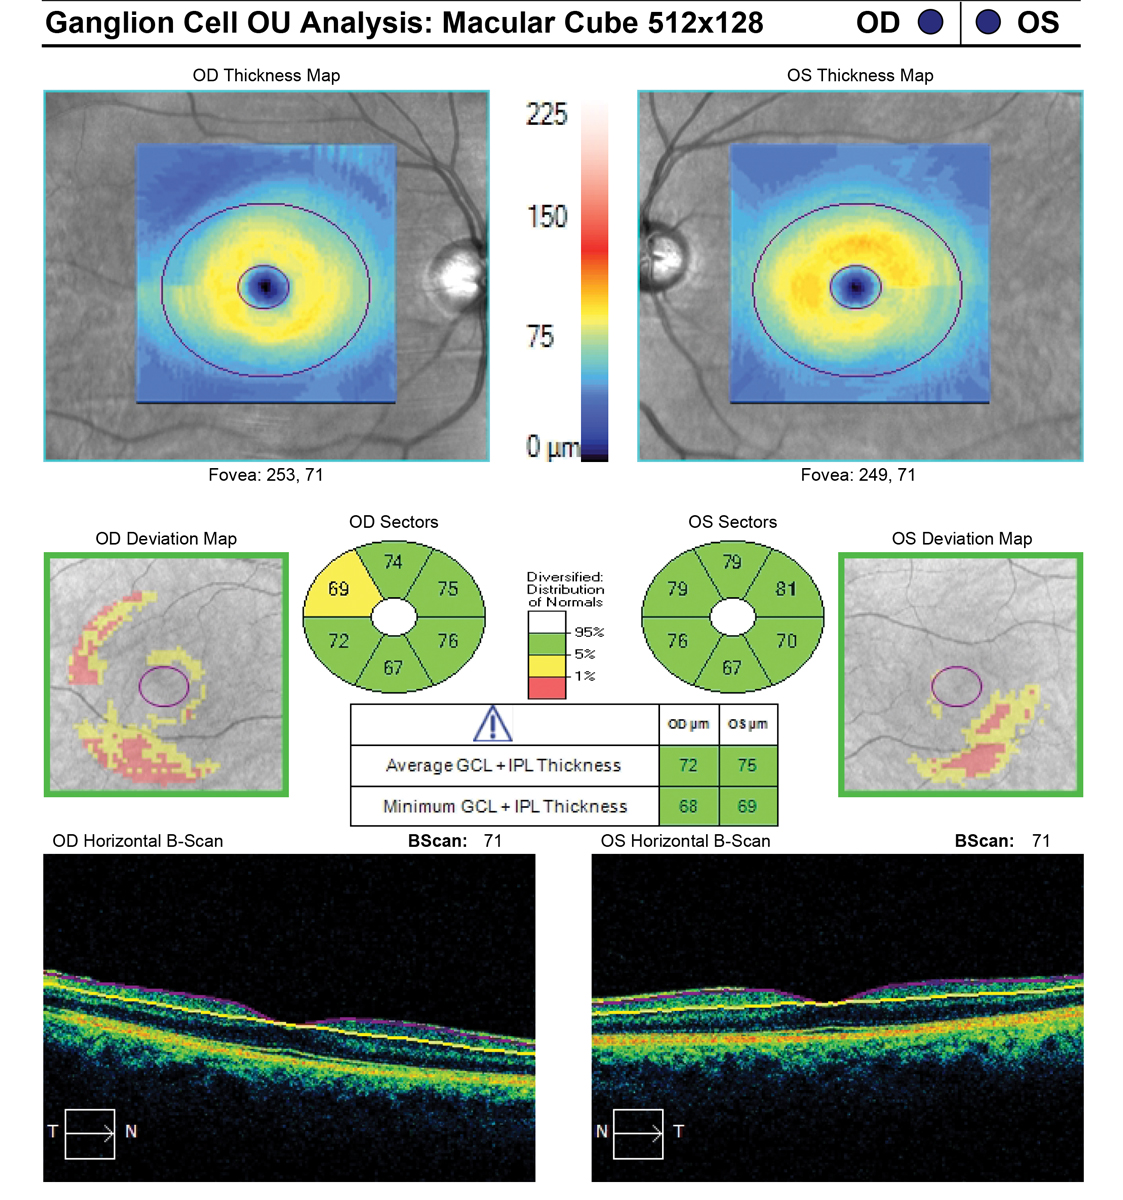 The full macular cube scan might prove more beneficial for diagnosing nonglaucomatous macular pathologies.